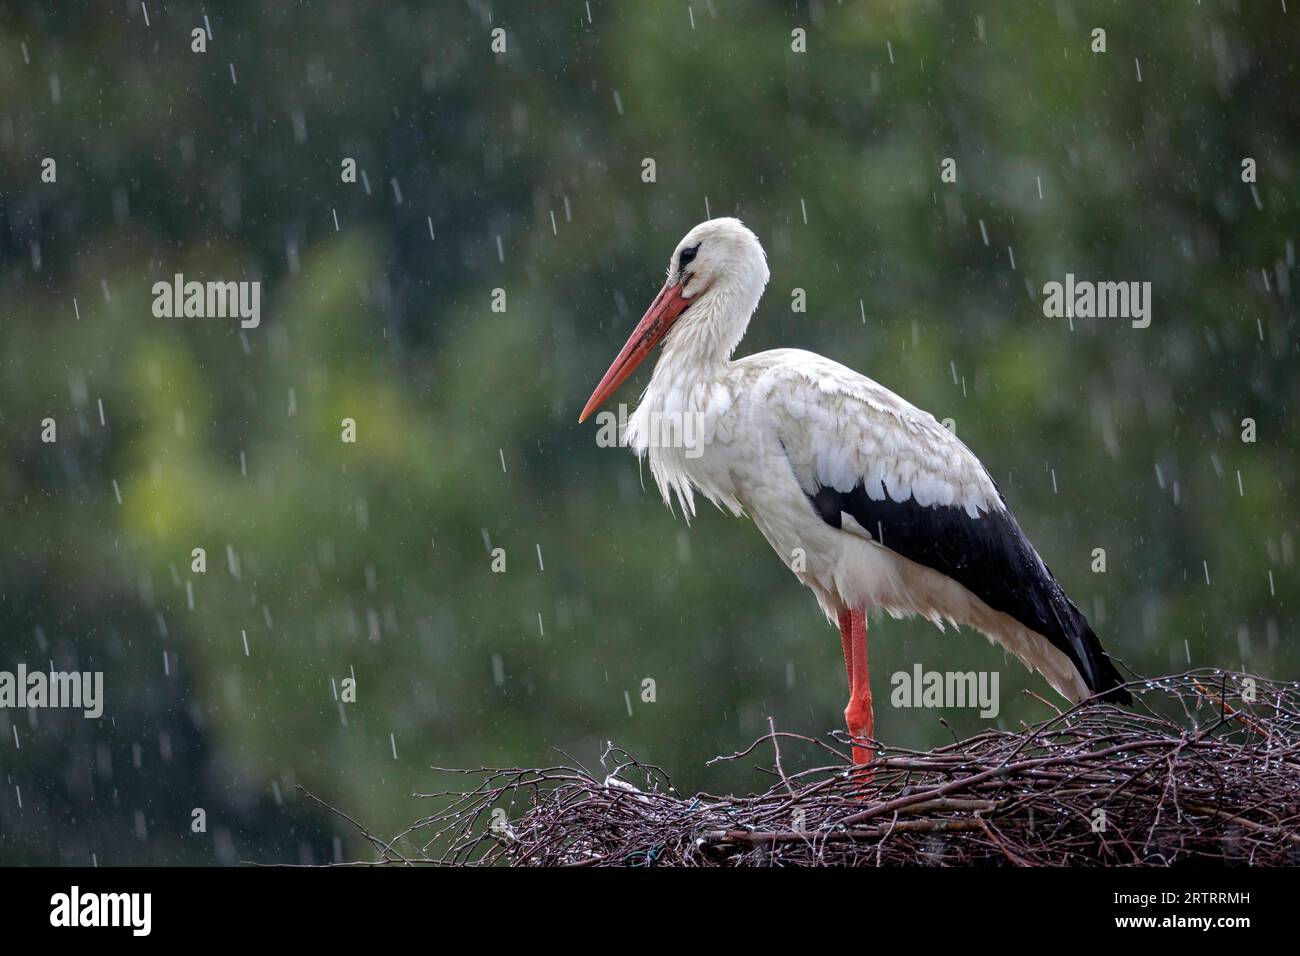 White Stork (Ciconia ciconia), the nesting season starts in Europe from April to August (Photo White Stork in heavy rain on the nest), White Stork Stock Photo